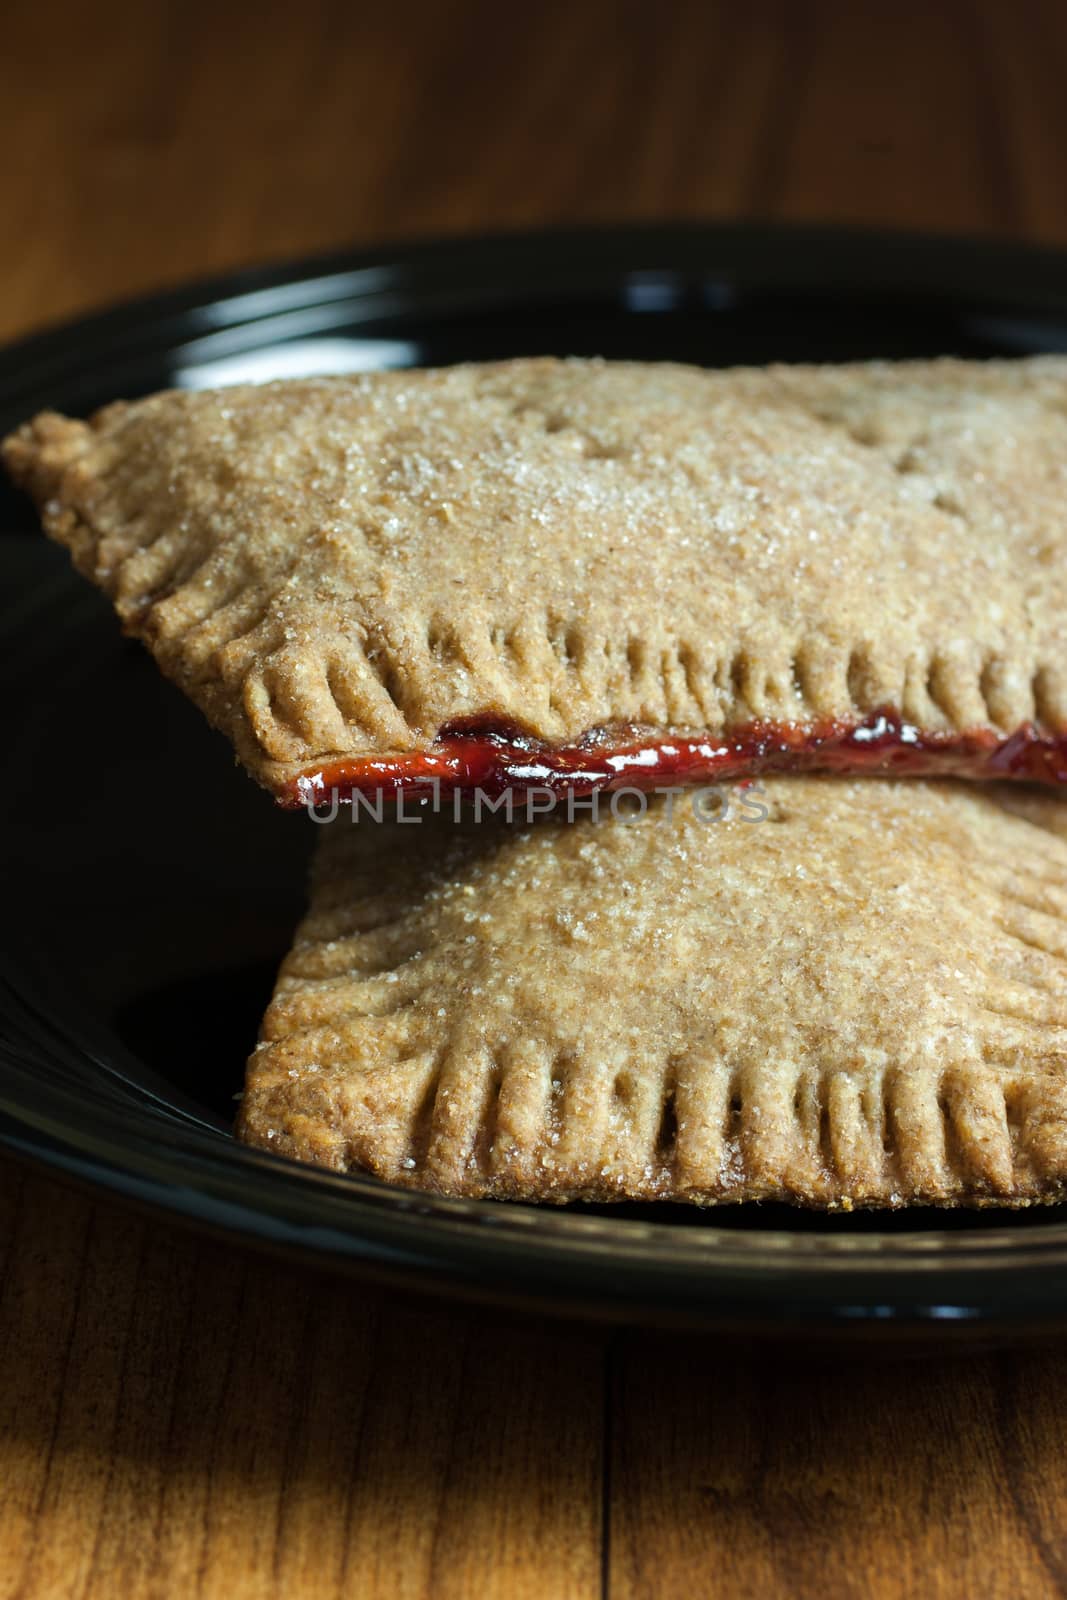 Whole Wheat Toaster Pastries by SouthernLightStudios